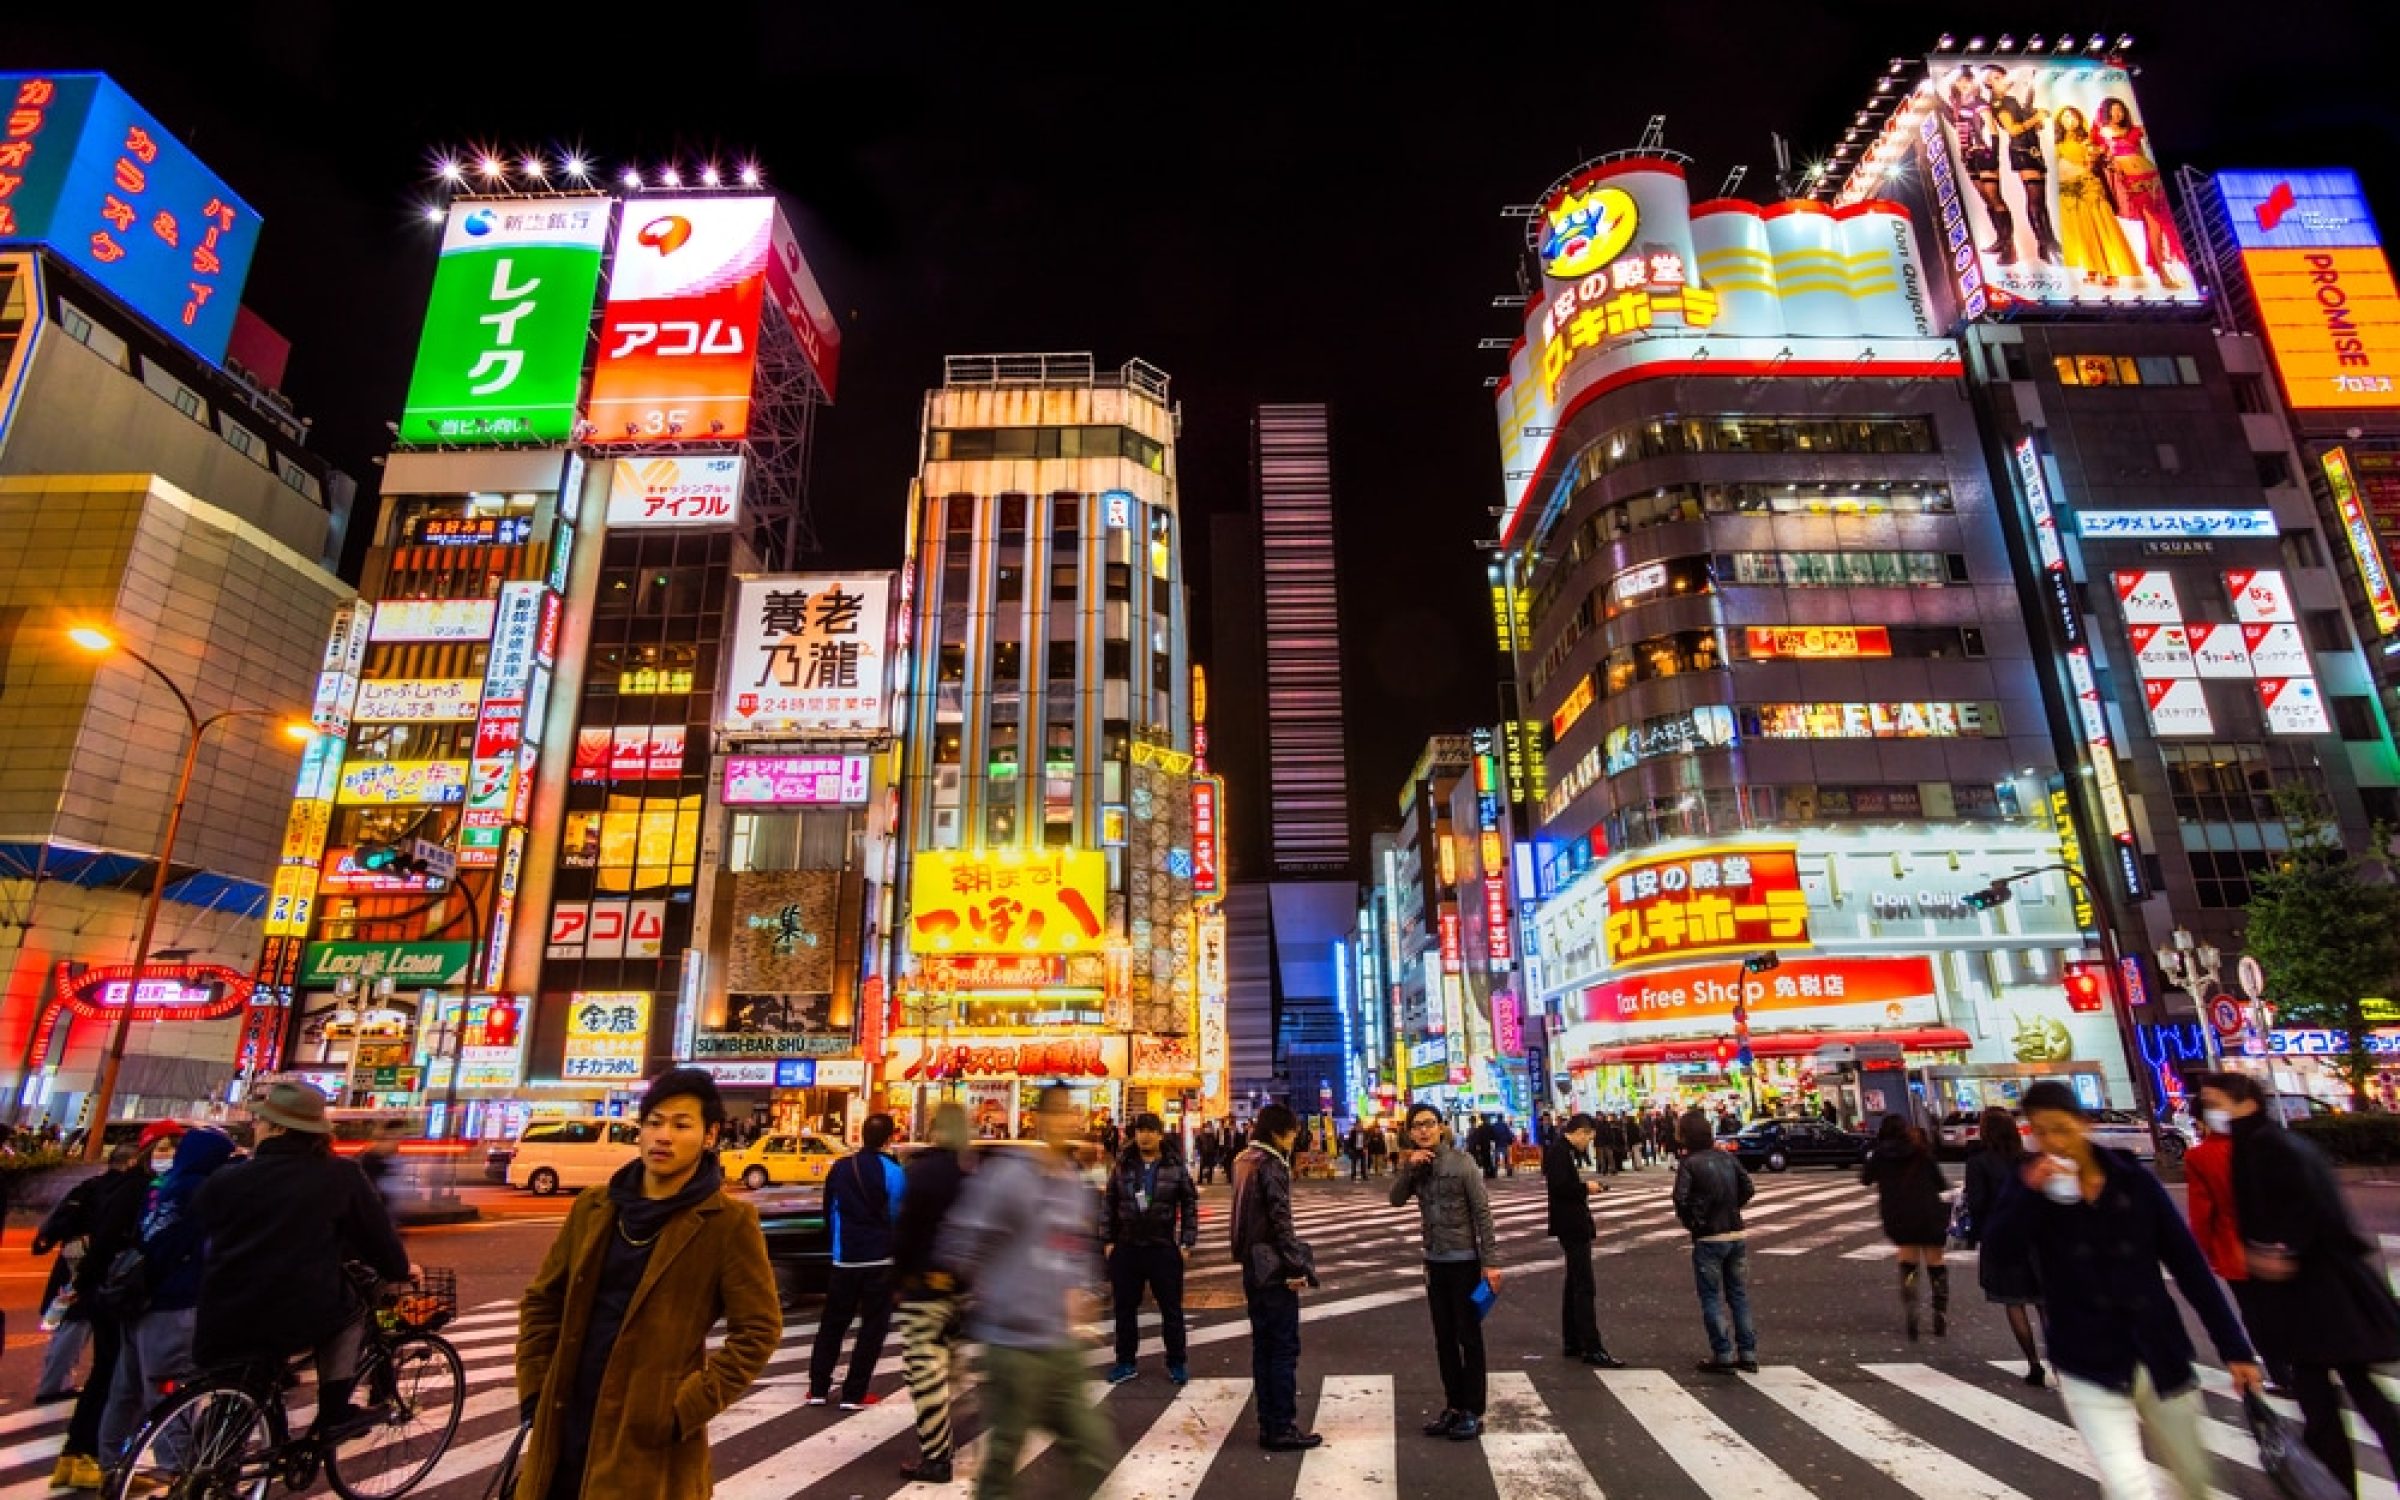 Tokyo, Japan, where the global equities market is thriving